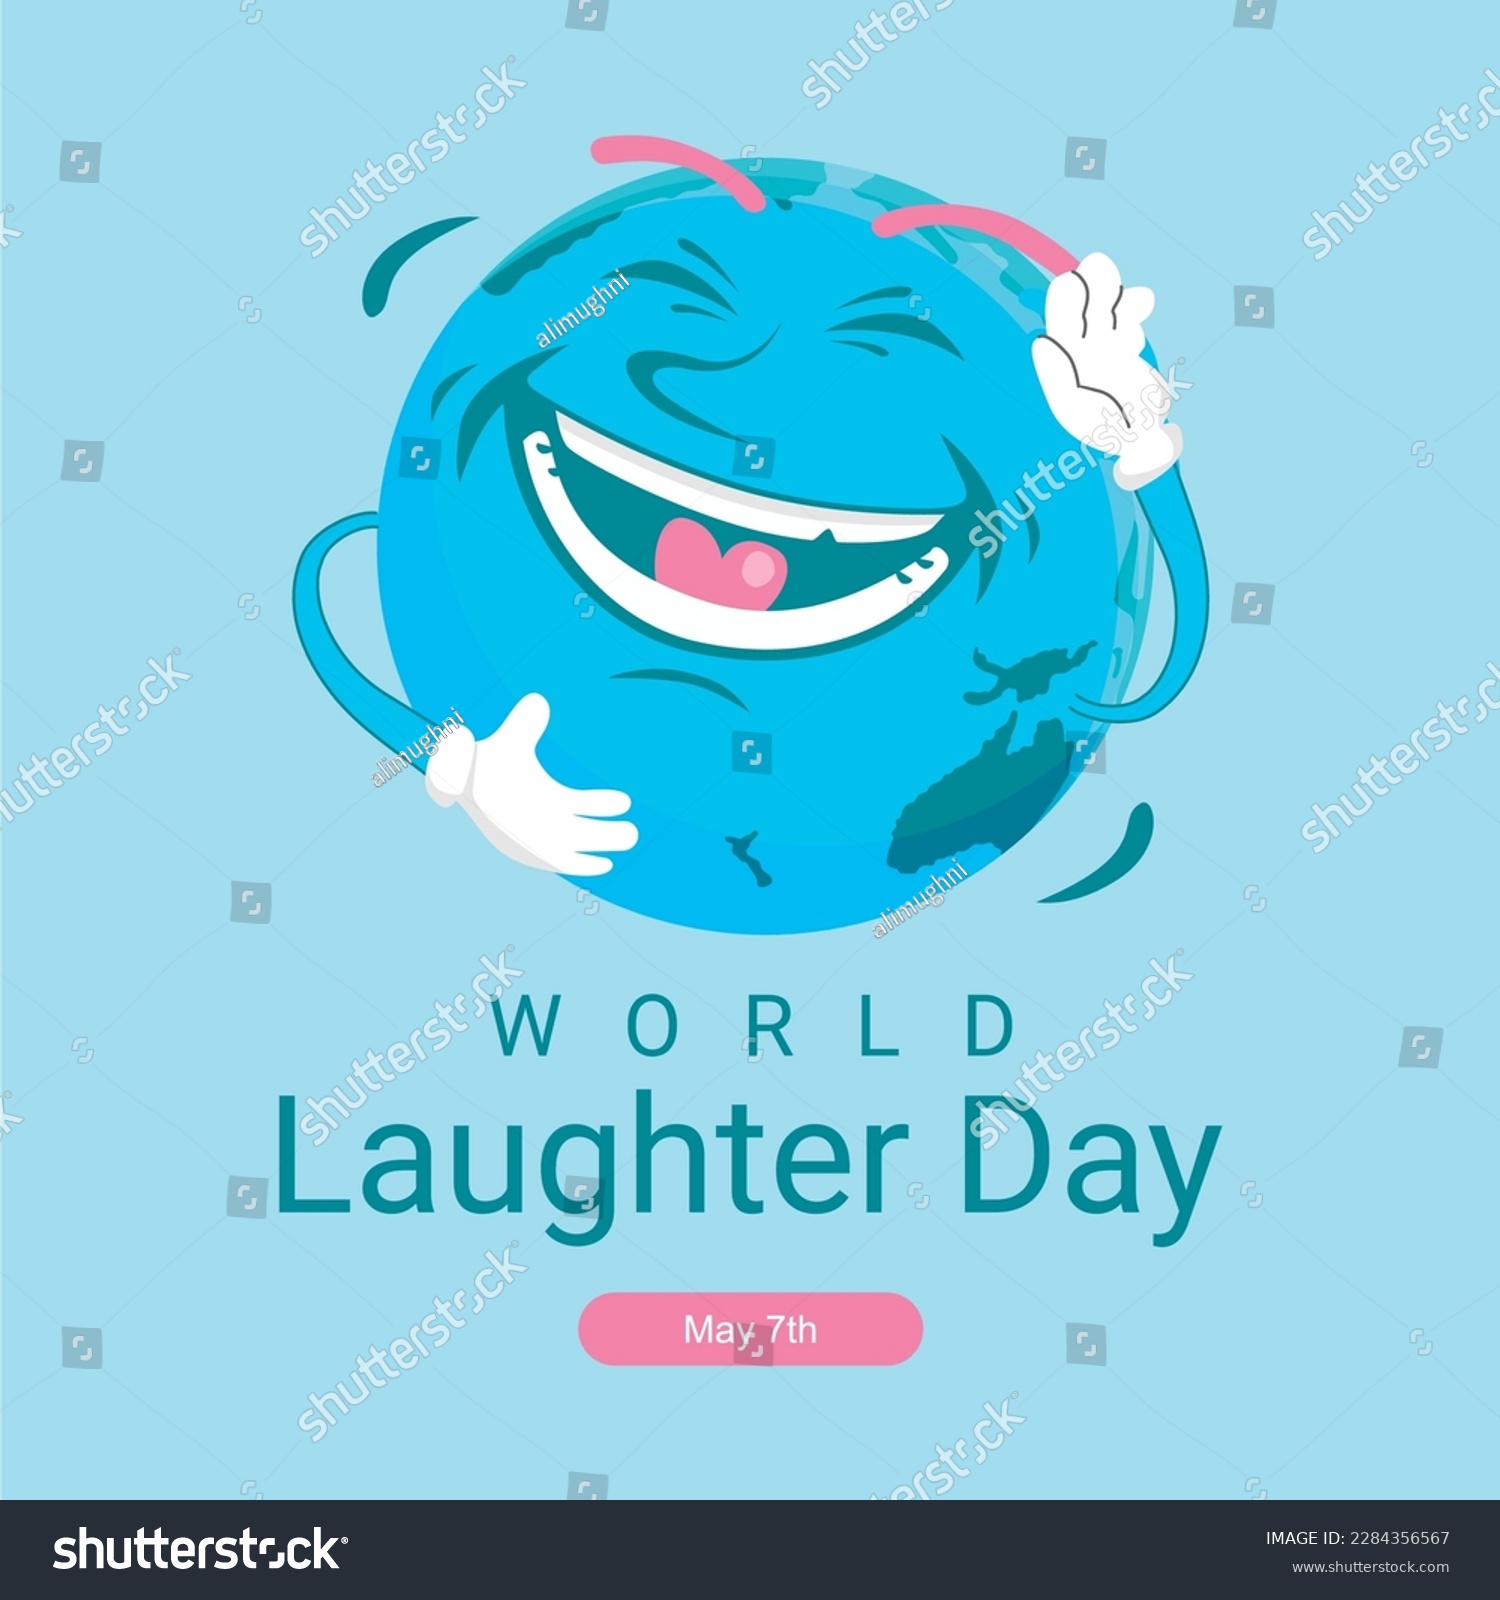 world laughter day poster template vector stock #2284356567